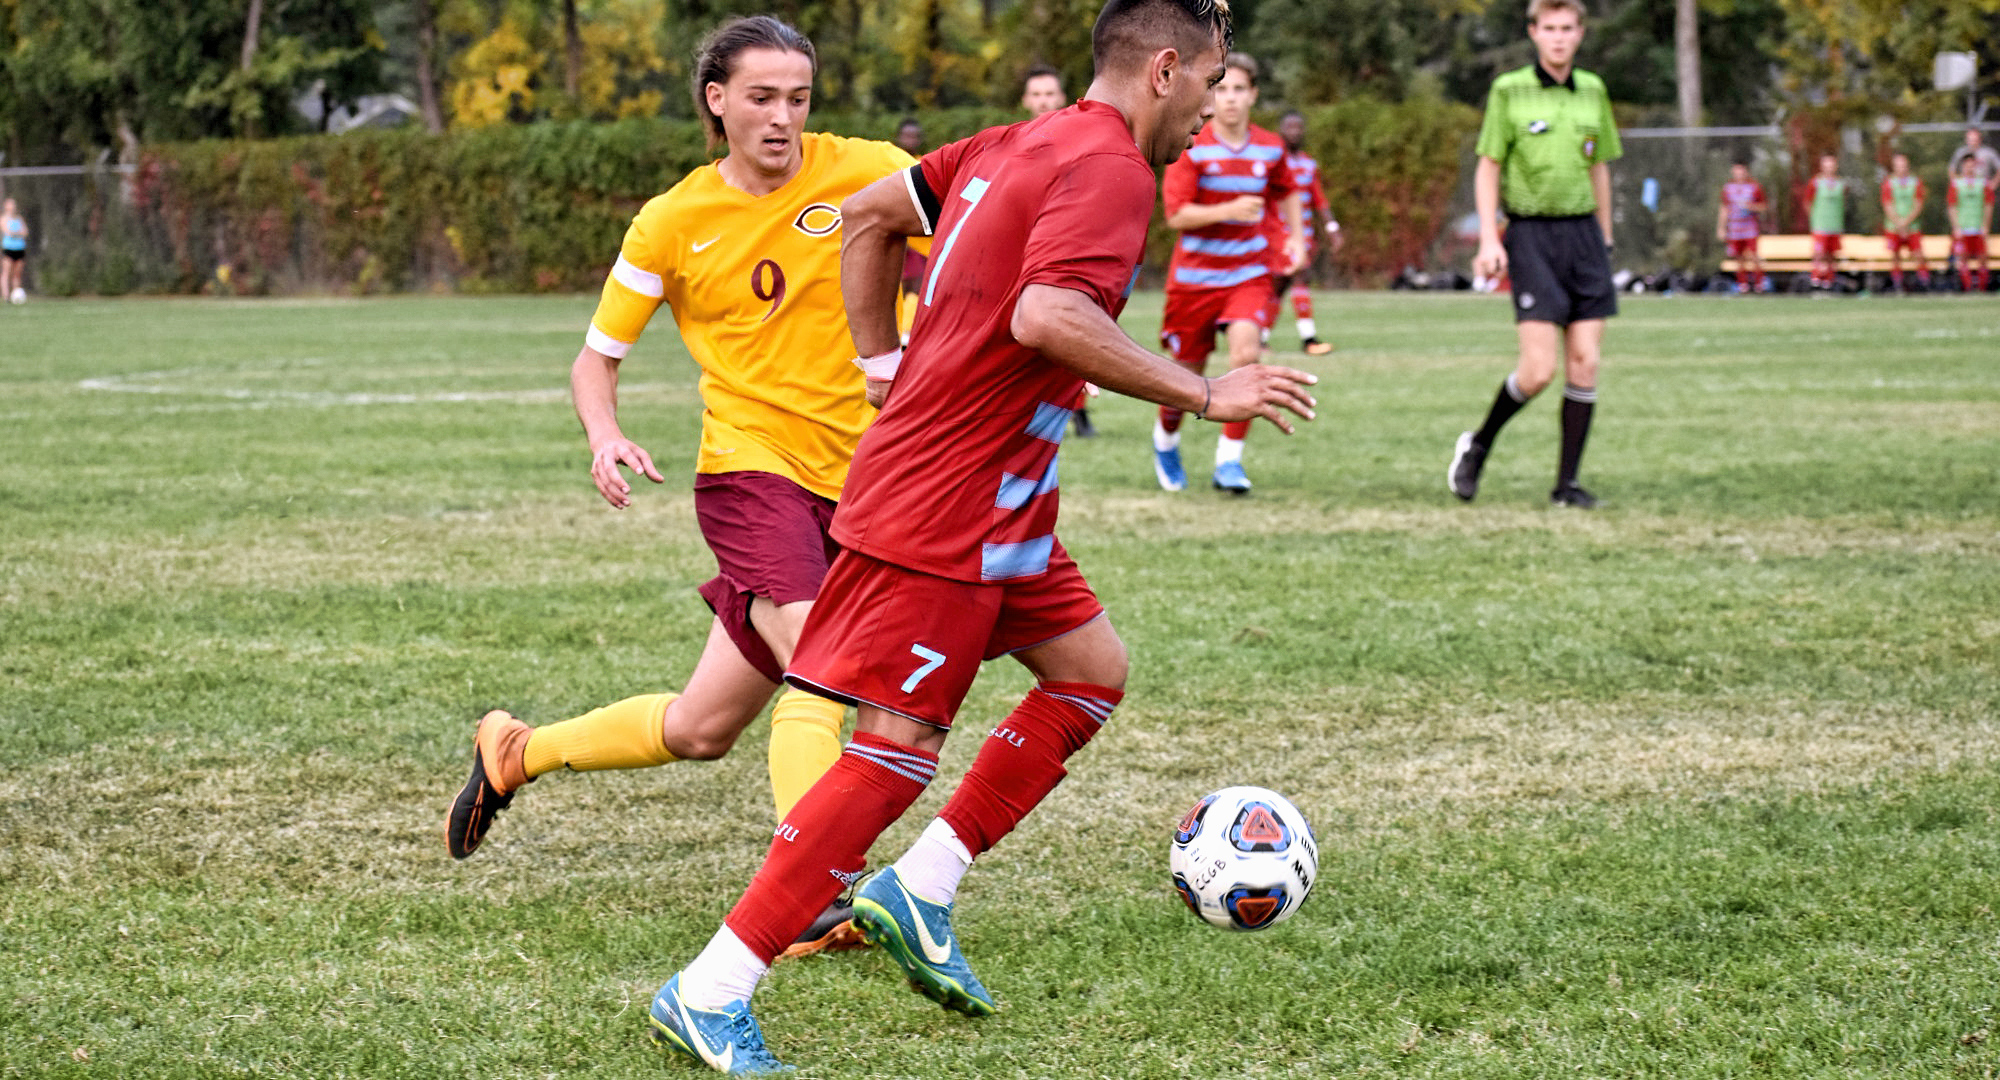 Junior Justin Froslie scored the game-winning goal on a penalty kick in the Cobbers' 1-0 win at Carleton.